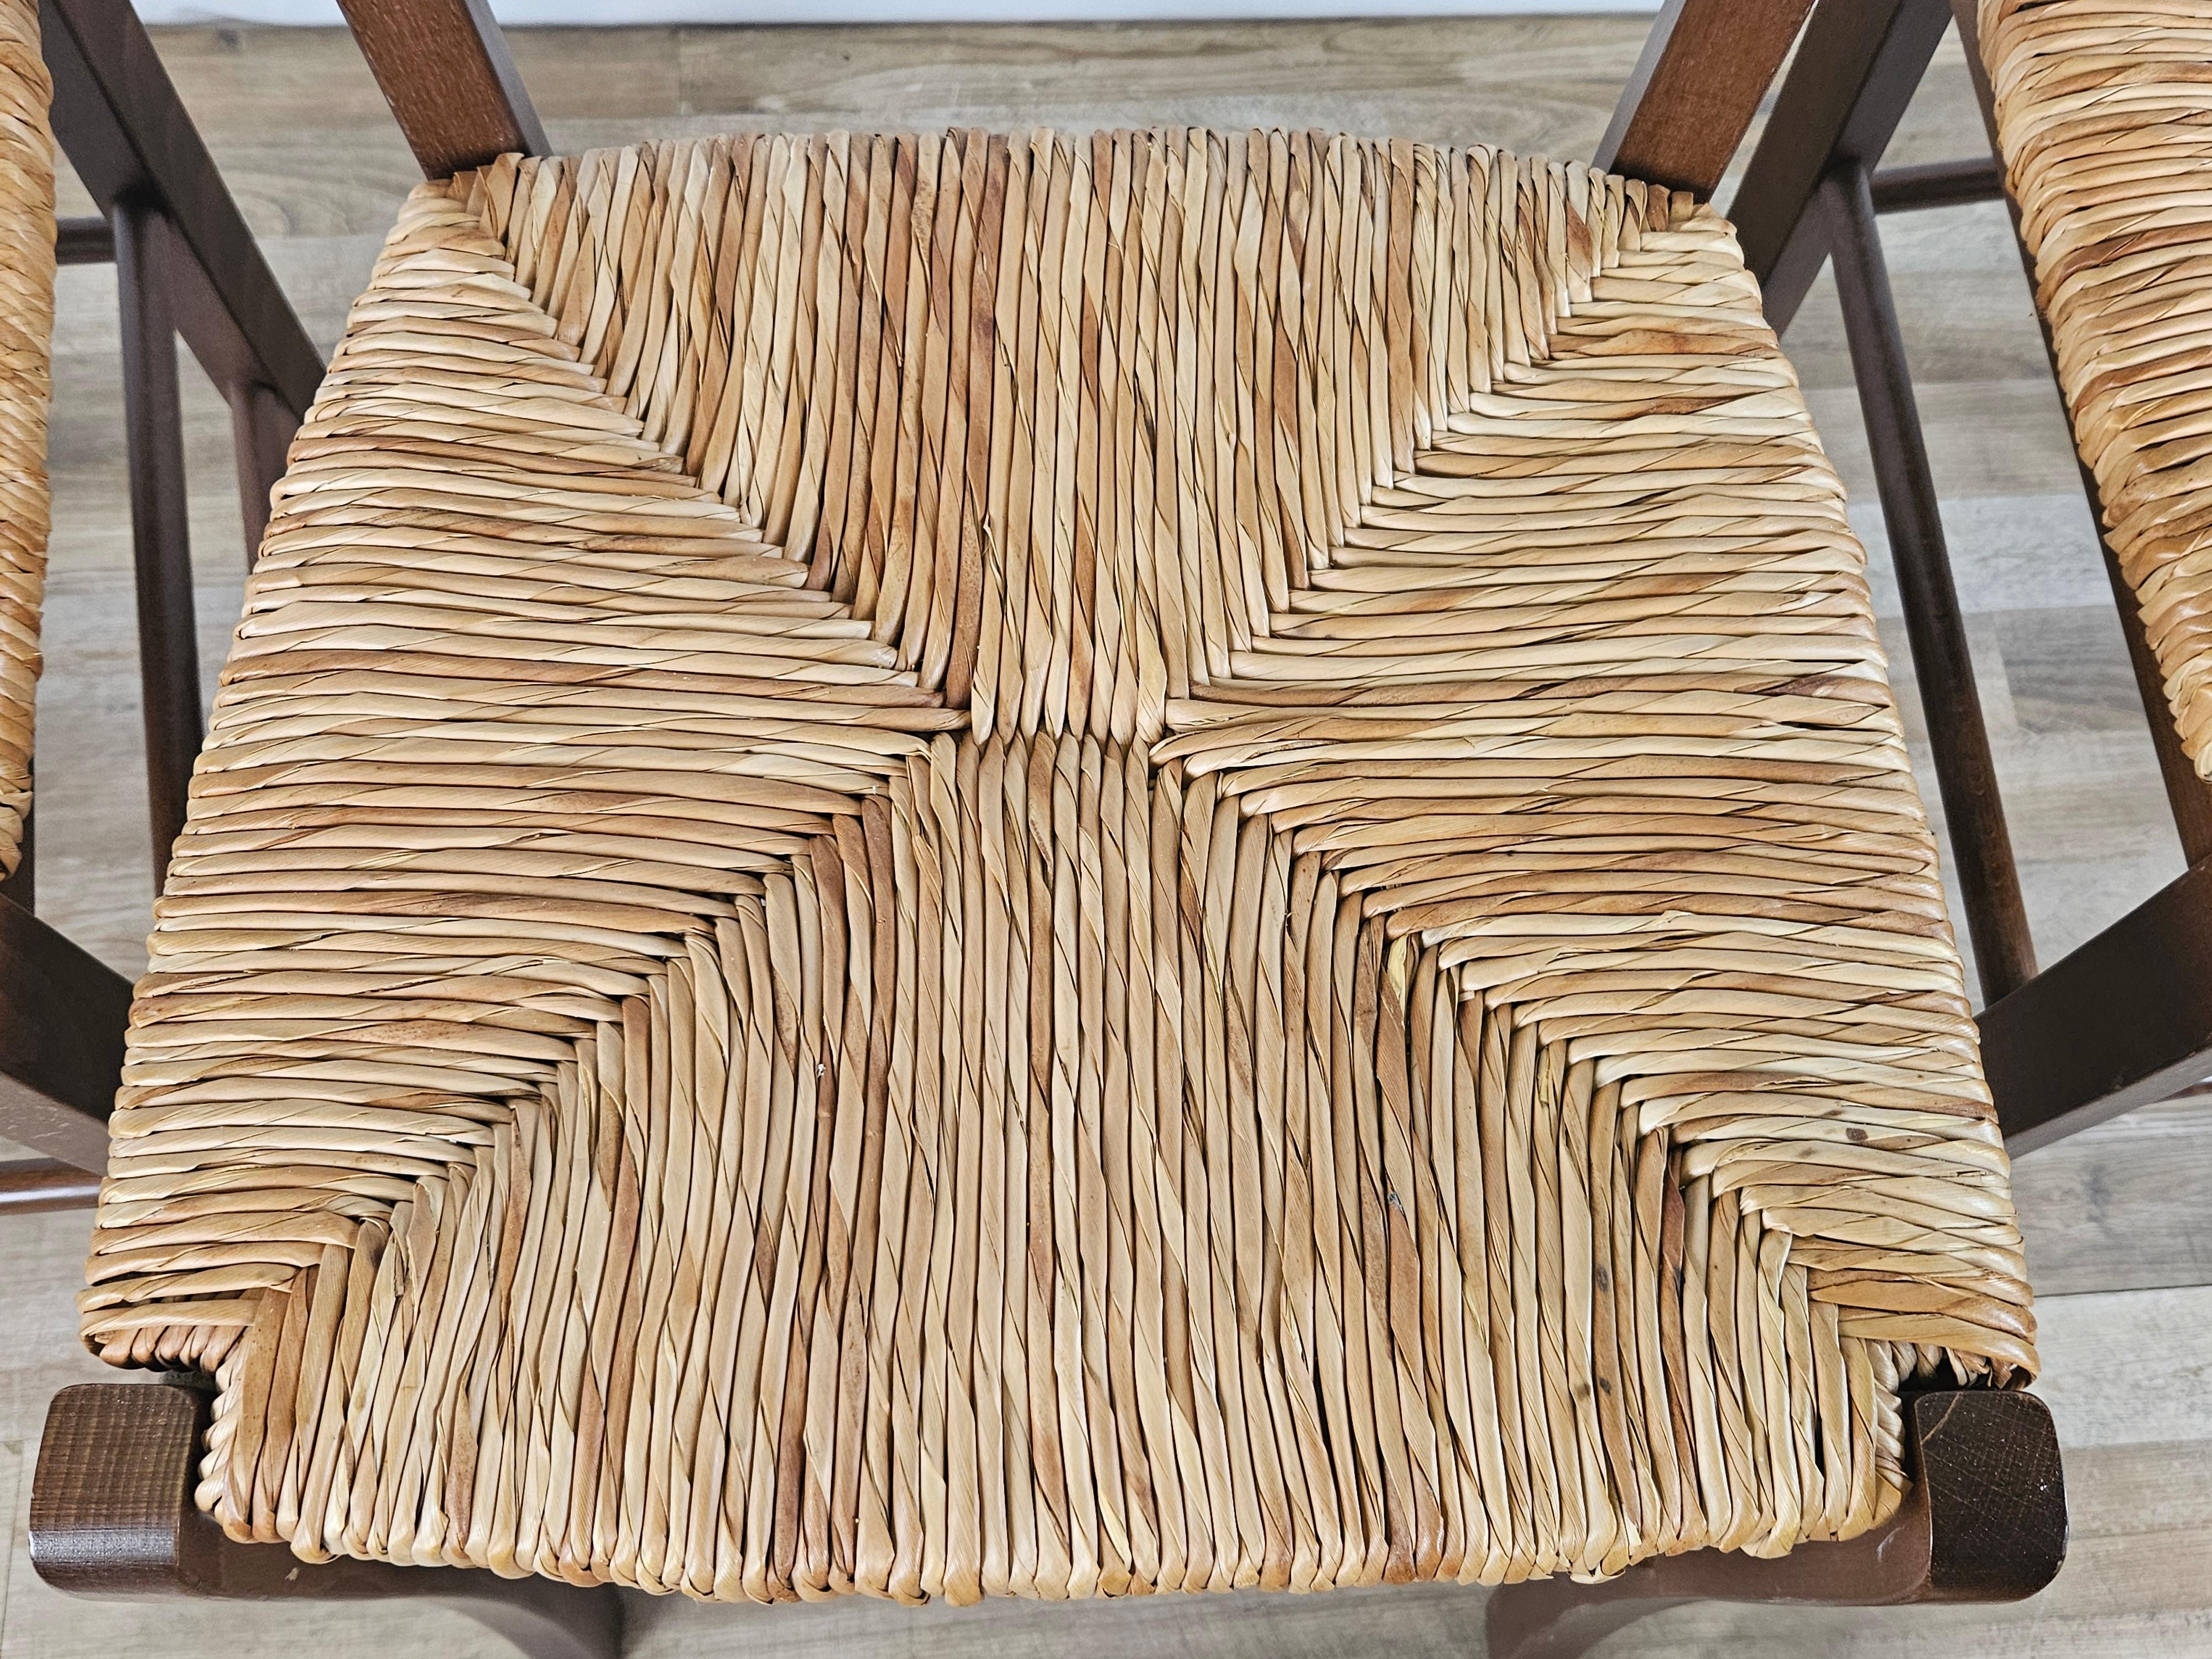 Set of four dining room chairs made of wood and straw For Sale 3